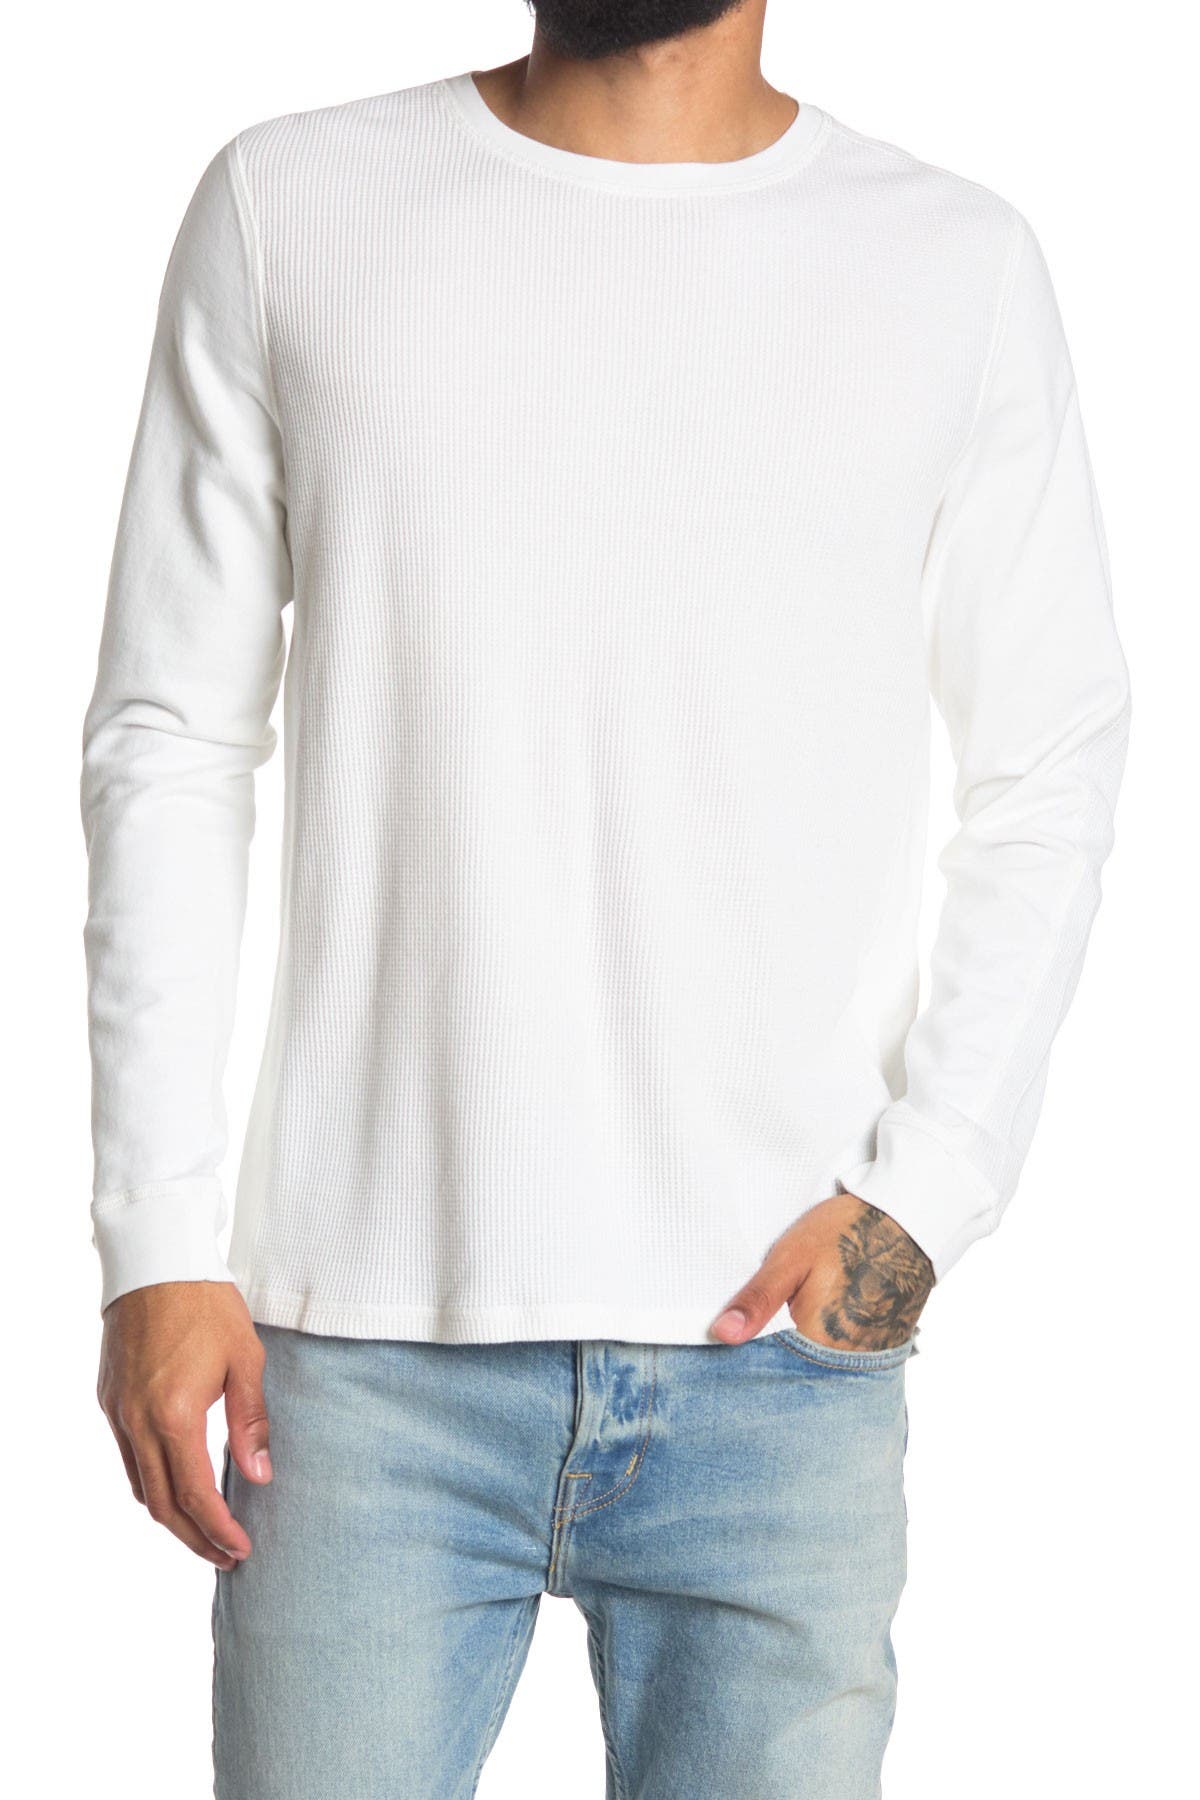 AG Adriano Goldschmied Mens Trevor Long Sleeve Thermal Crew